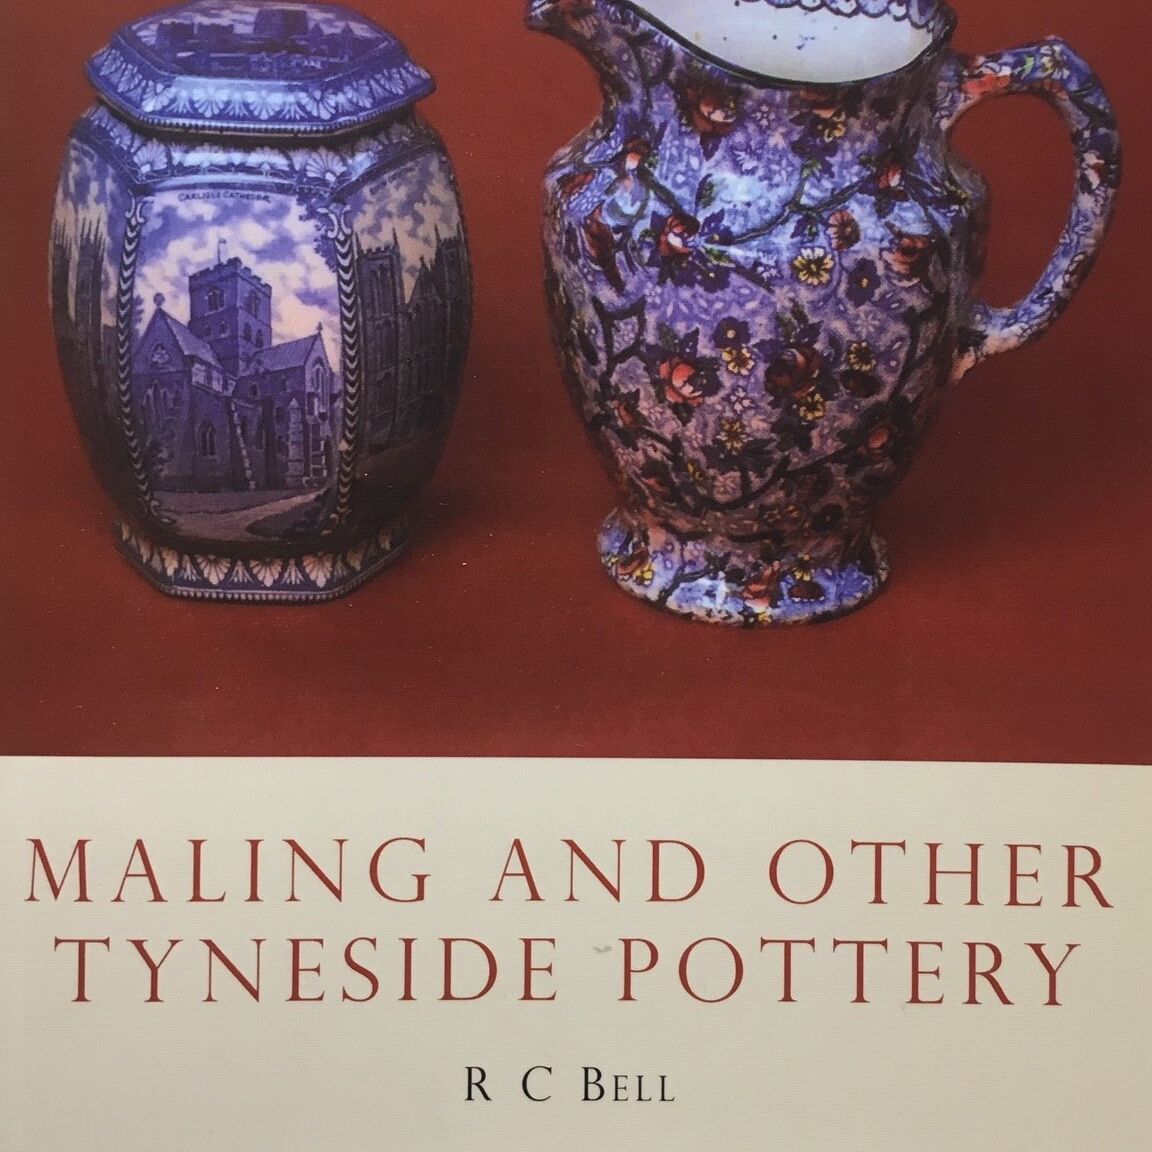 Shire Book: Mailing and Other Tyneside Pottery